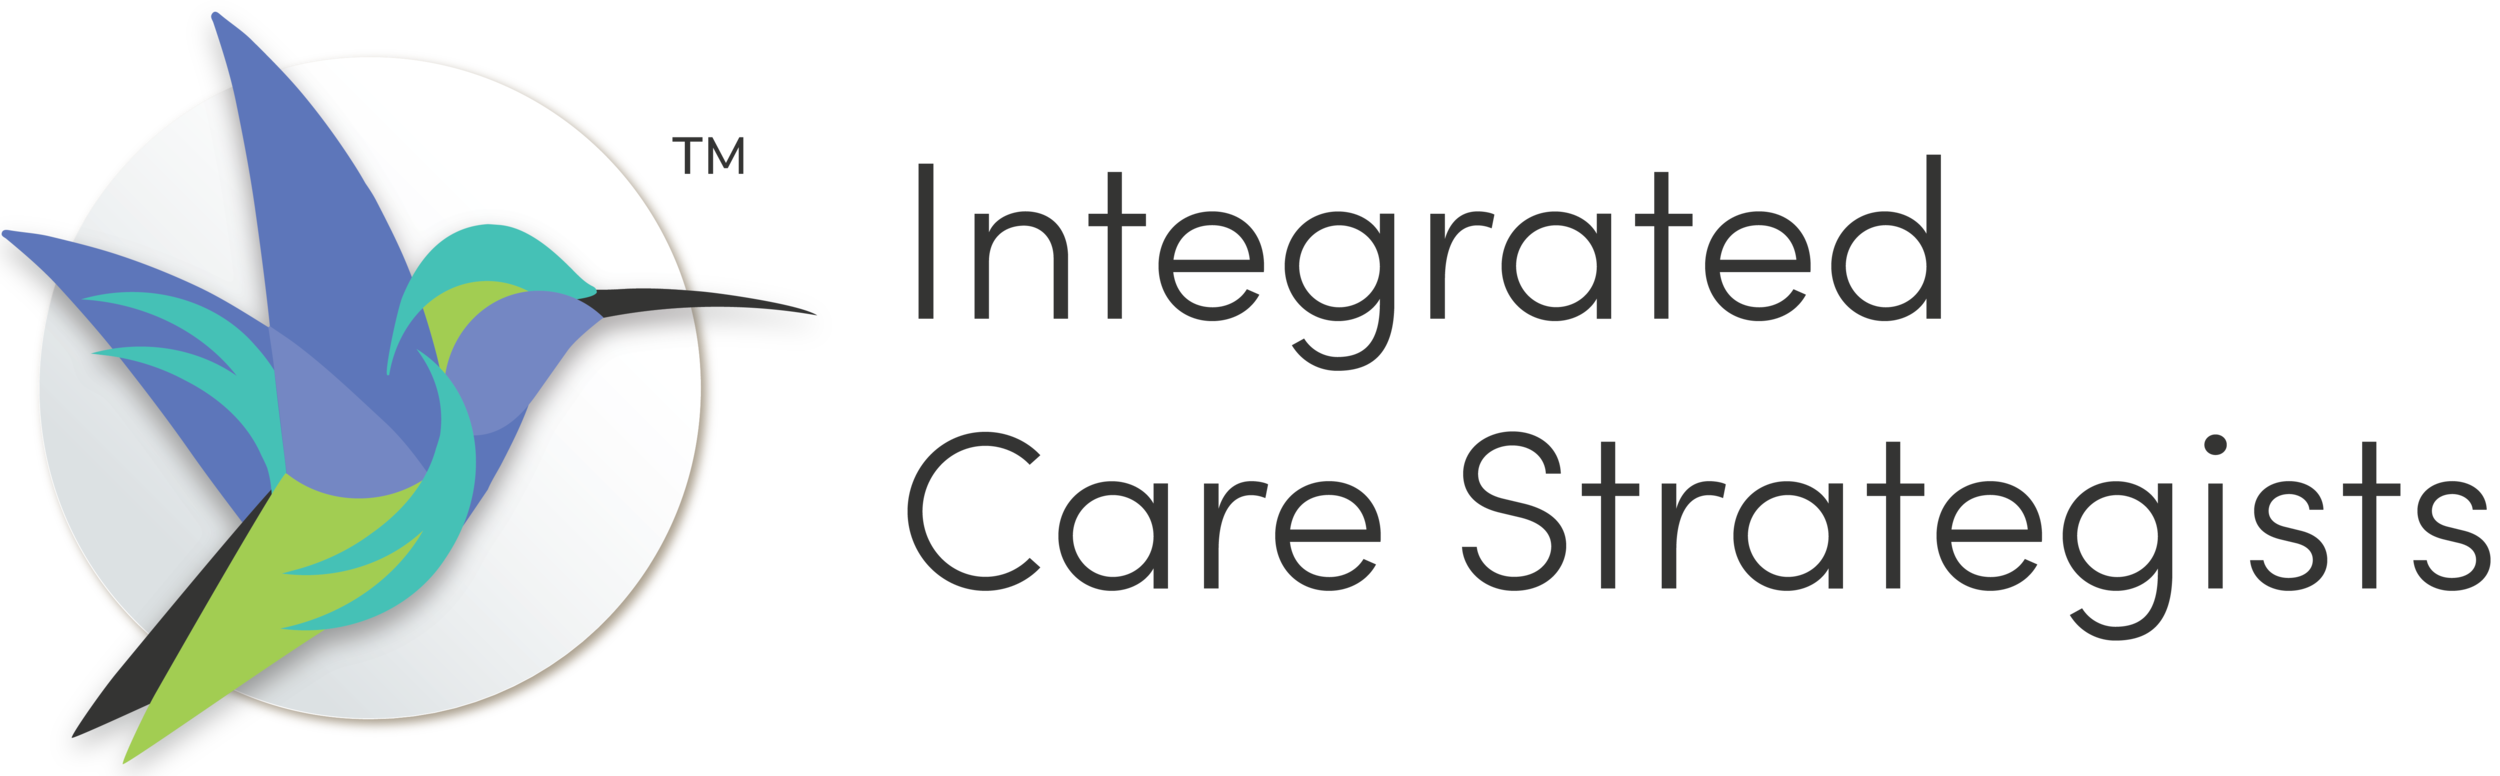 Integrated Care Strategists: The Care Coordination Consultants of Choice